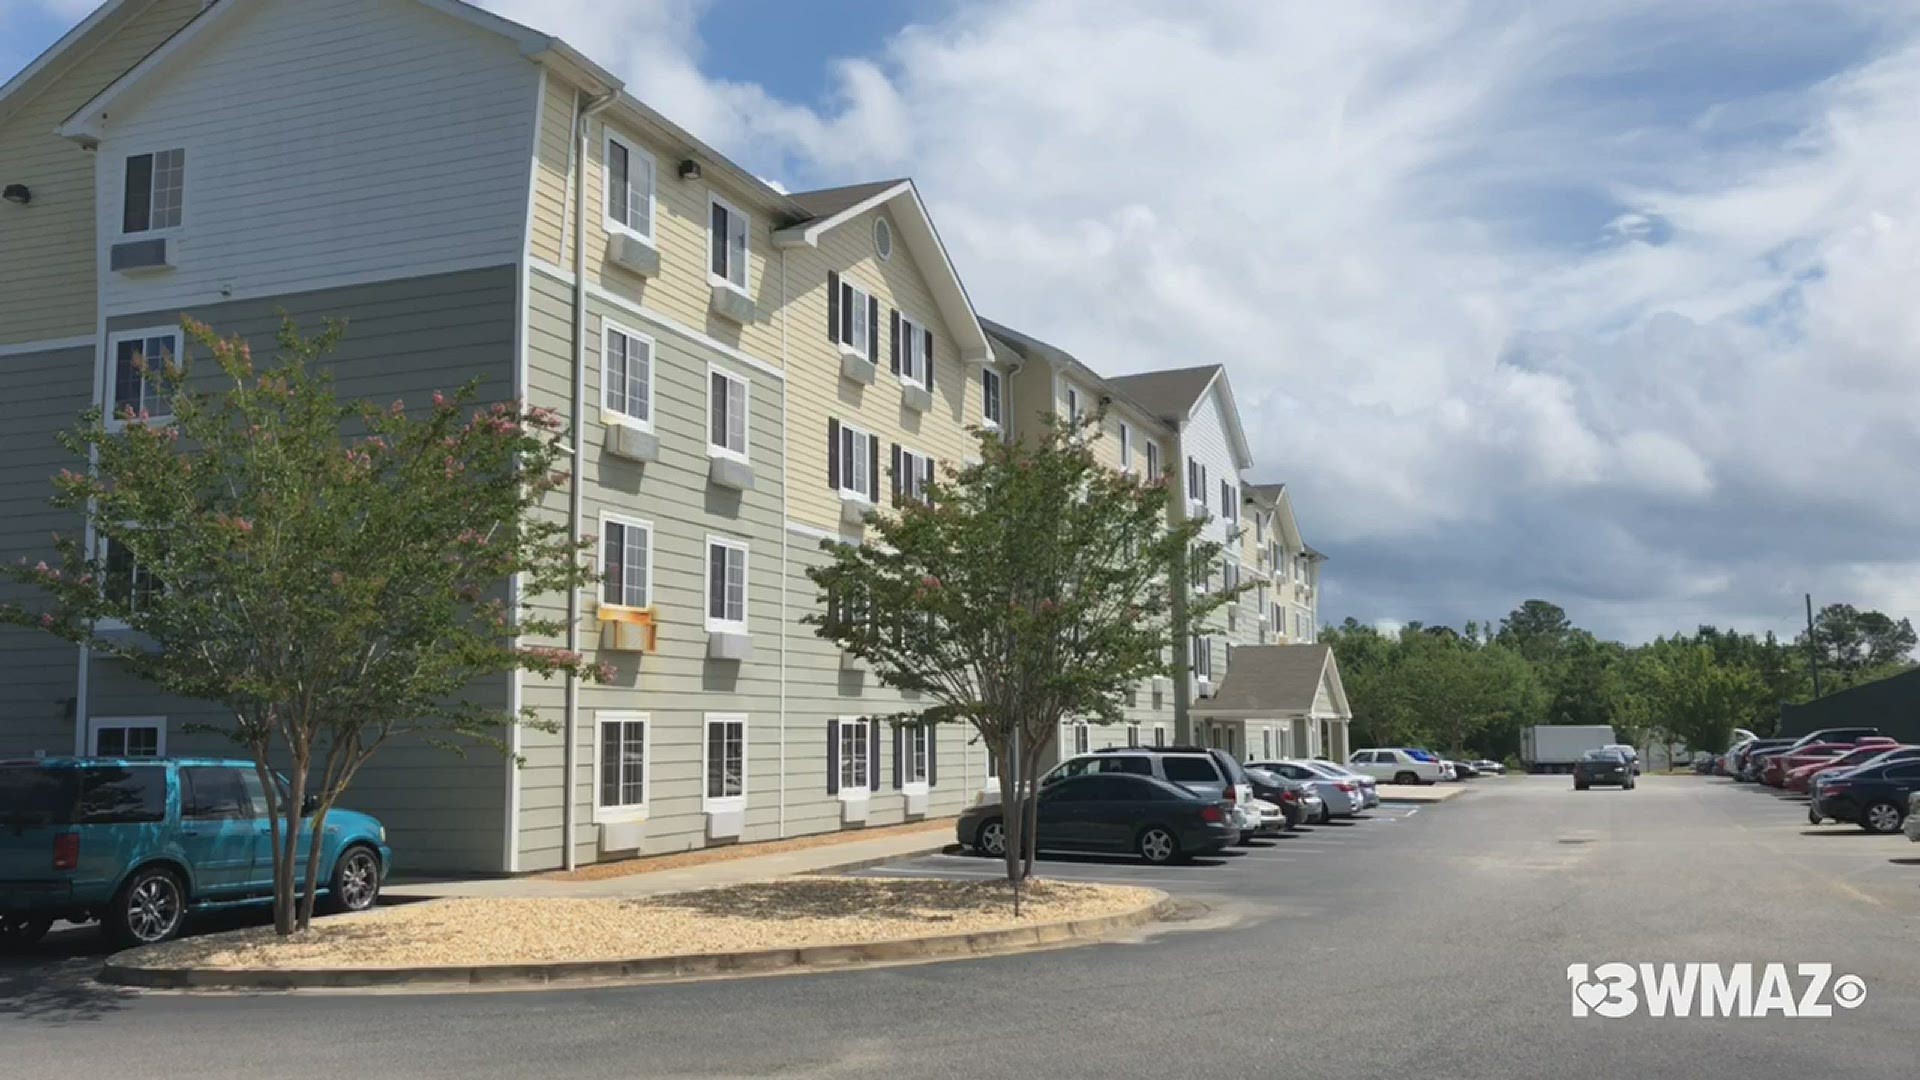 The Bibb County Sheriff's Office said it happened at the Wood Spring Suites at 4949 Harrison Road around 5 p.m., according to a news release.